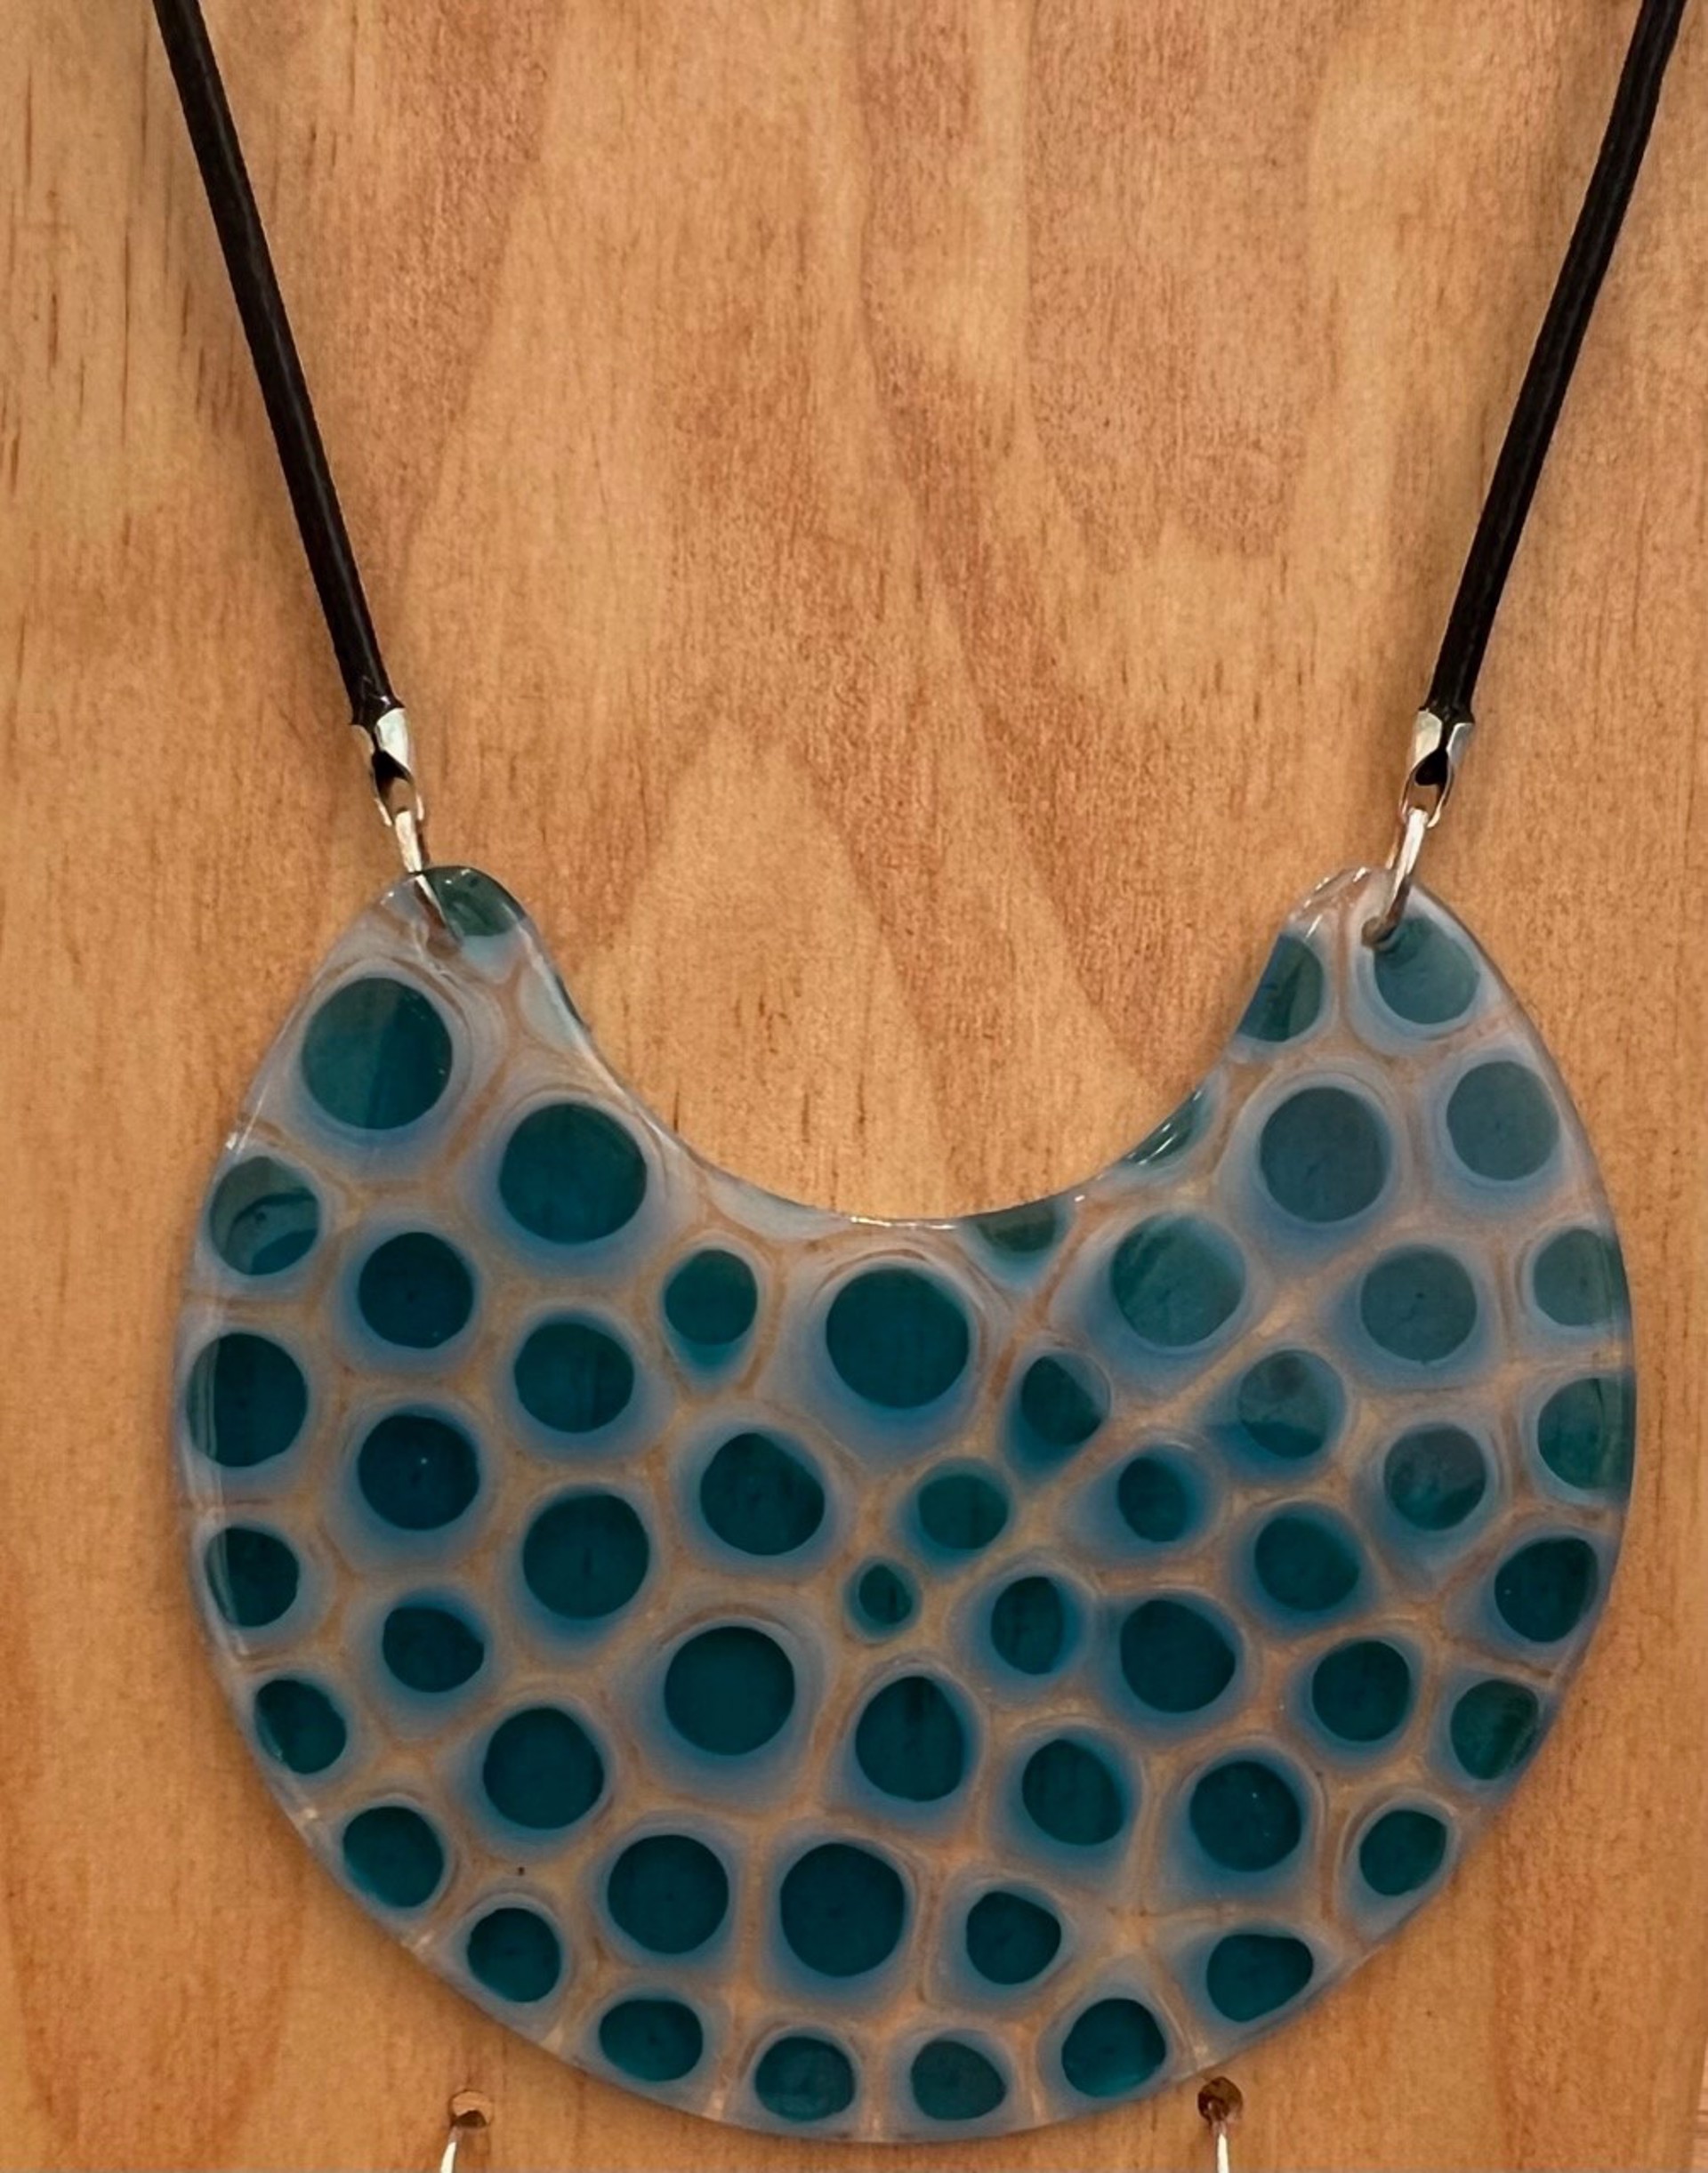 Murrini Missing Bite Necklace by Chris Cox